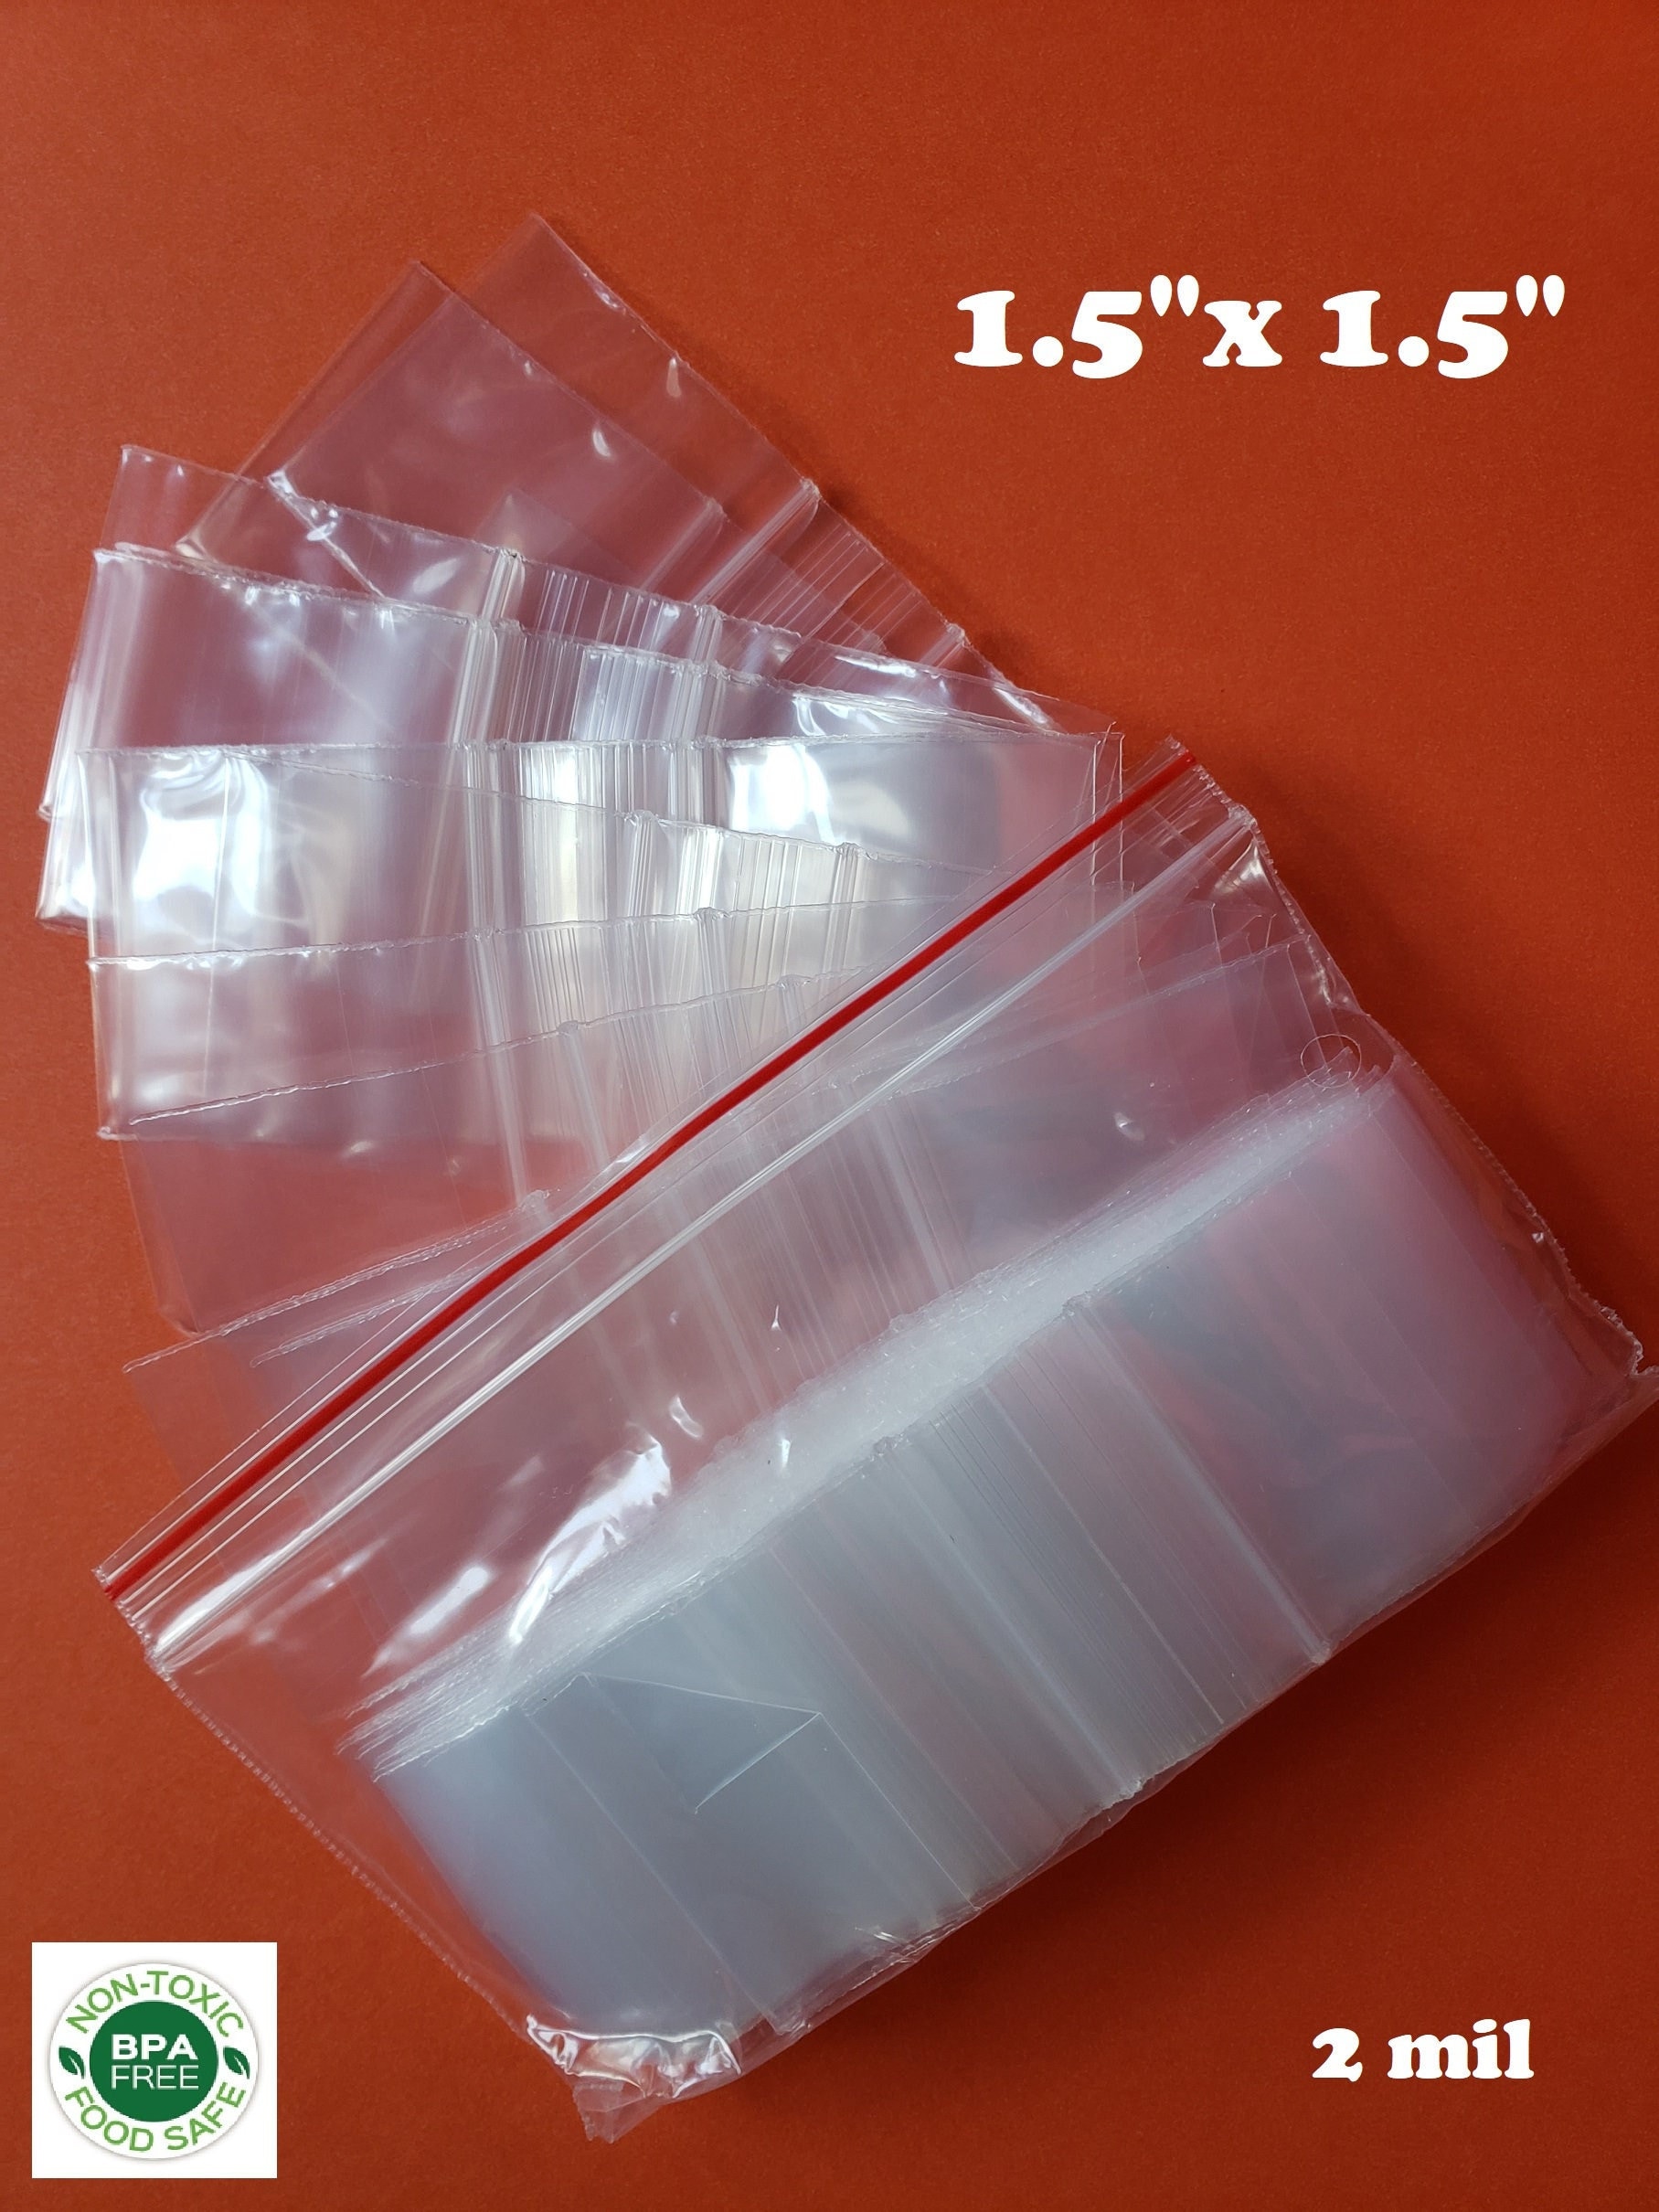 2 x 3-inch 2 Mil 100pcs Small Baggies, Heavy Duty Resealable Mini Ziplock  Plastic Bags for Tiny Items and Parts, Such as Jewelry Parts, Beads, Seeds,  Coins, Pills, Screws 